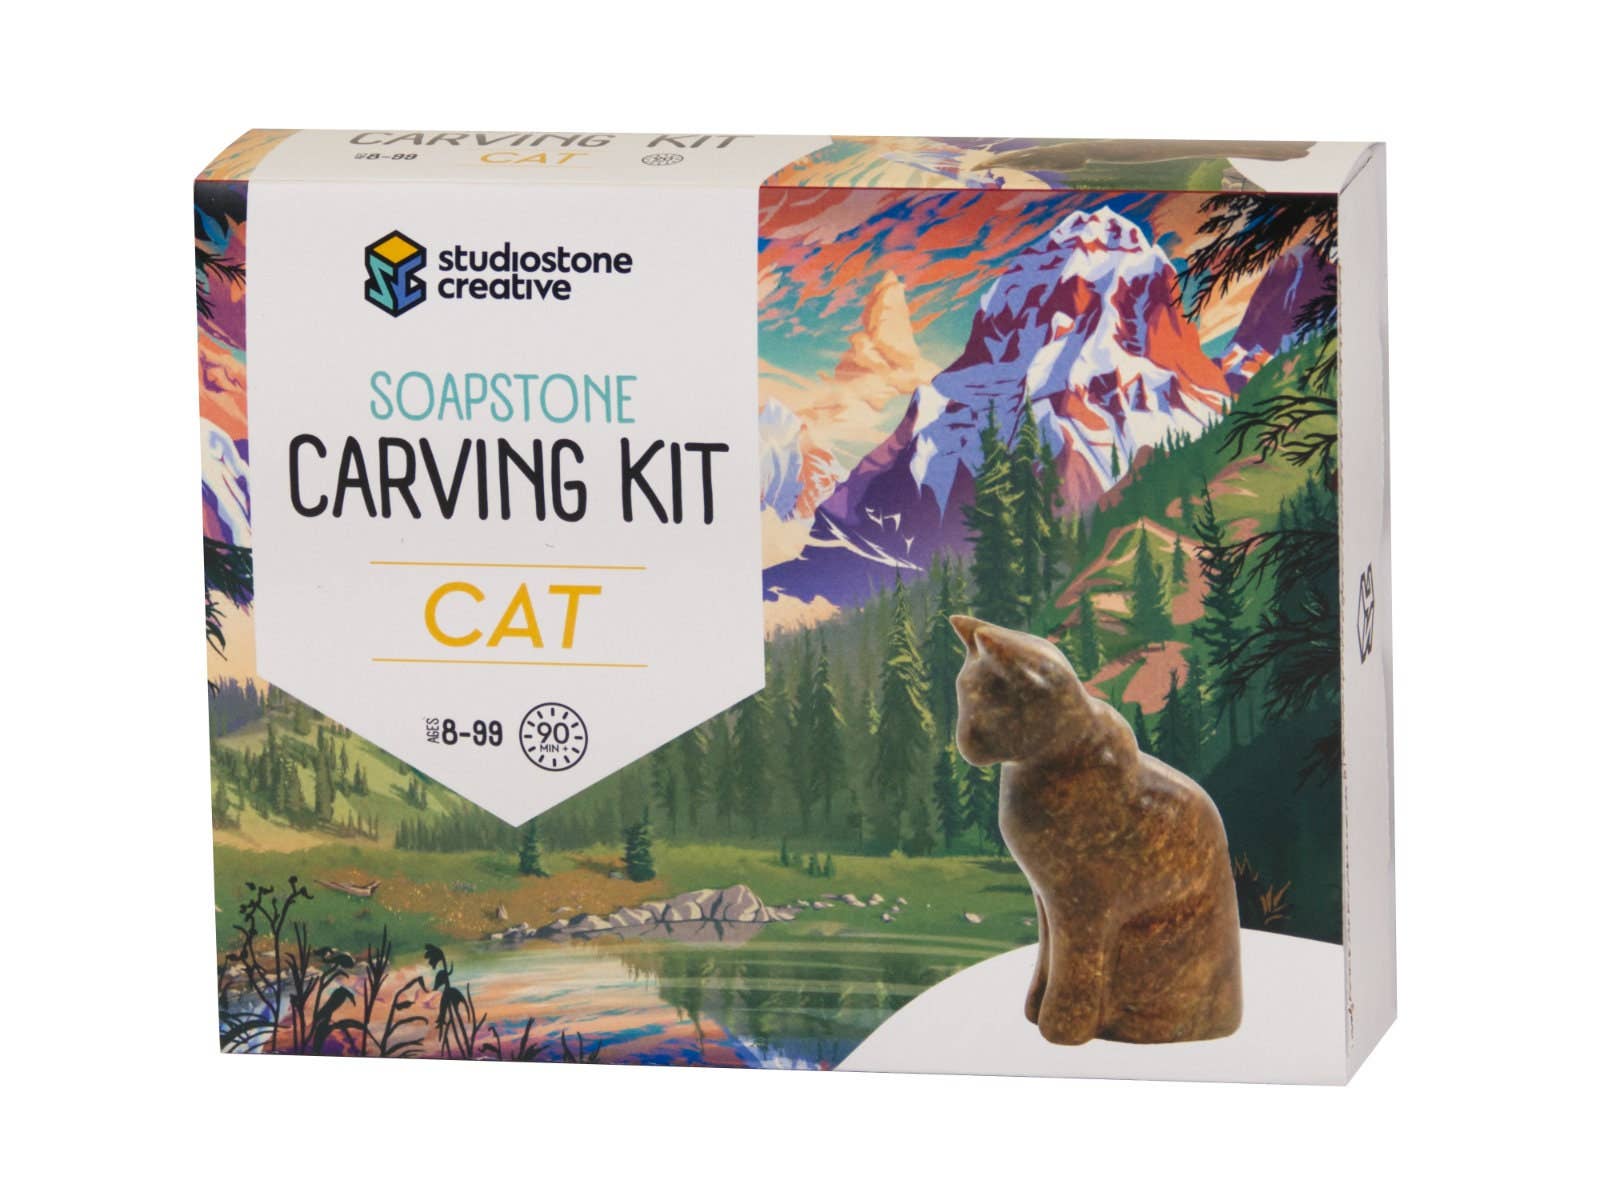 Studiostone Creative - Cat Soapstone Carving and Whittling—DIY Arts and Craft Kit. All Kid-Safe Tools and Materials Included. For kids and adults 8 to 99+ Years.